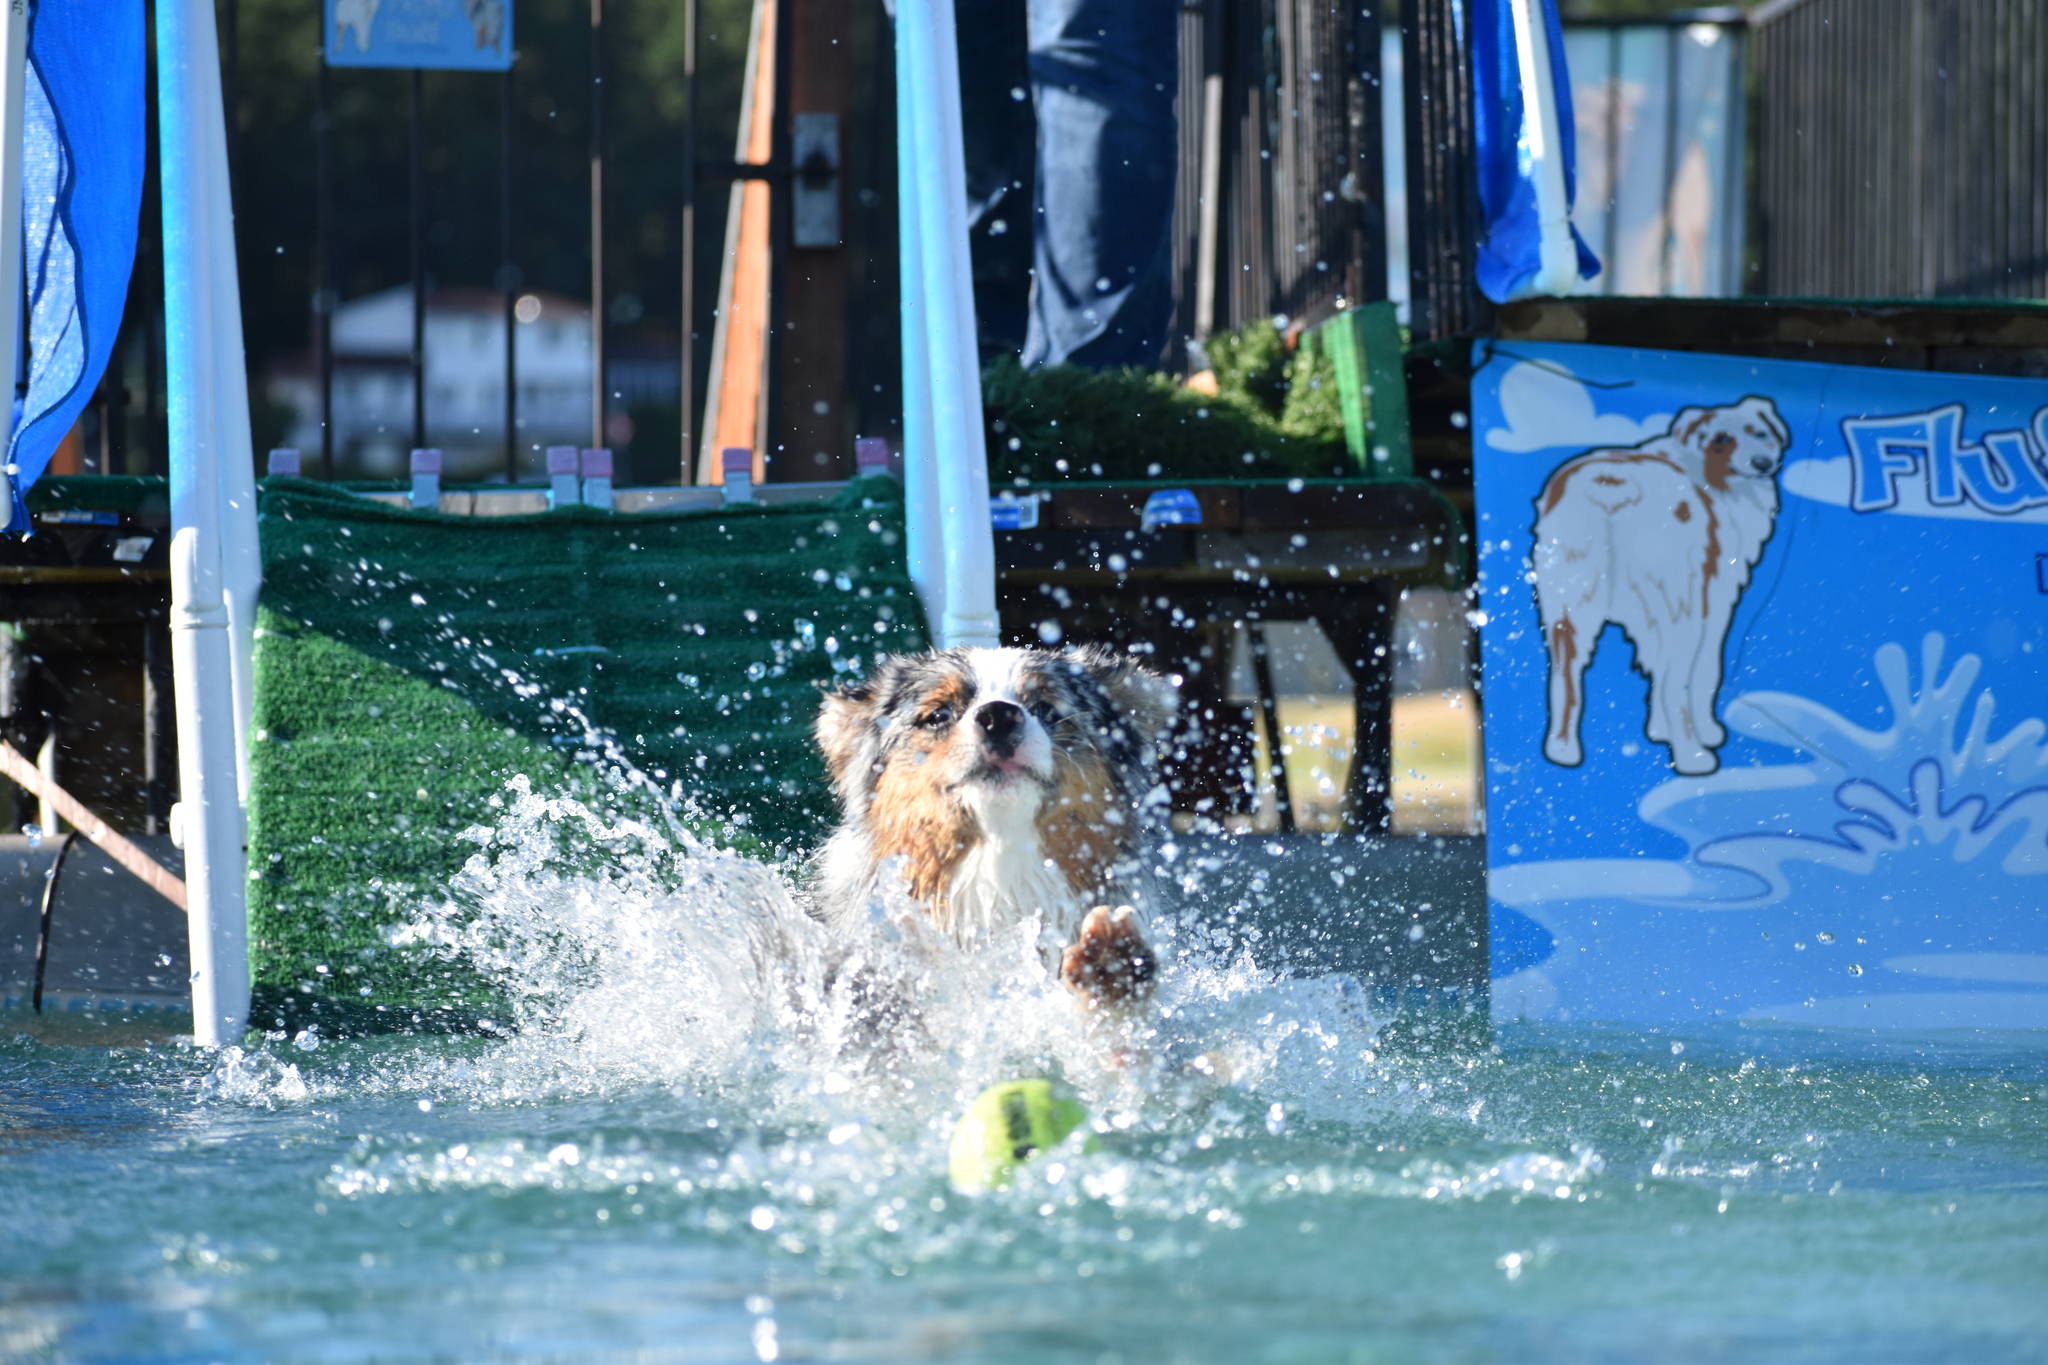 Photo by Emily Gilbert/Whidbey News-Times
Tracy Dietz's Australian shepherd, Sirius, jumps in the pool after a tennis ball at her home north of Oak Harbor. She offers pool use, dog training and a play area at FluffyButt Dog Training operated out of her house.